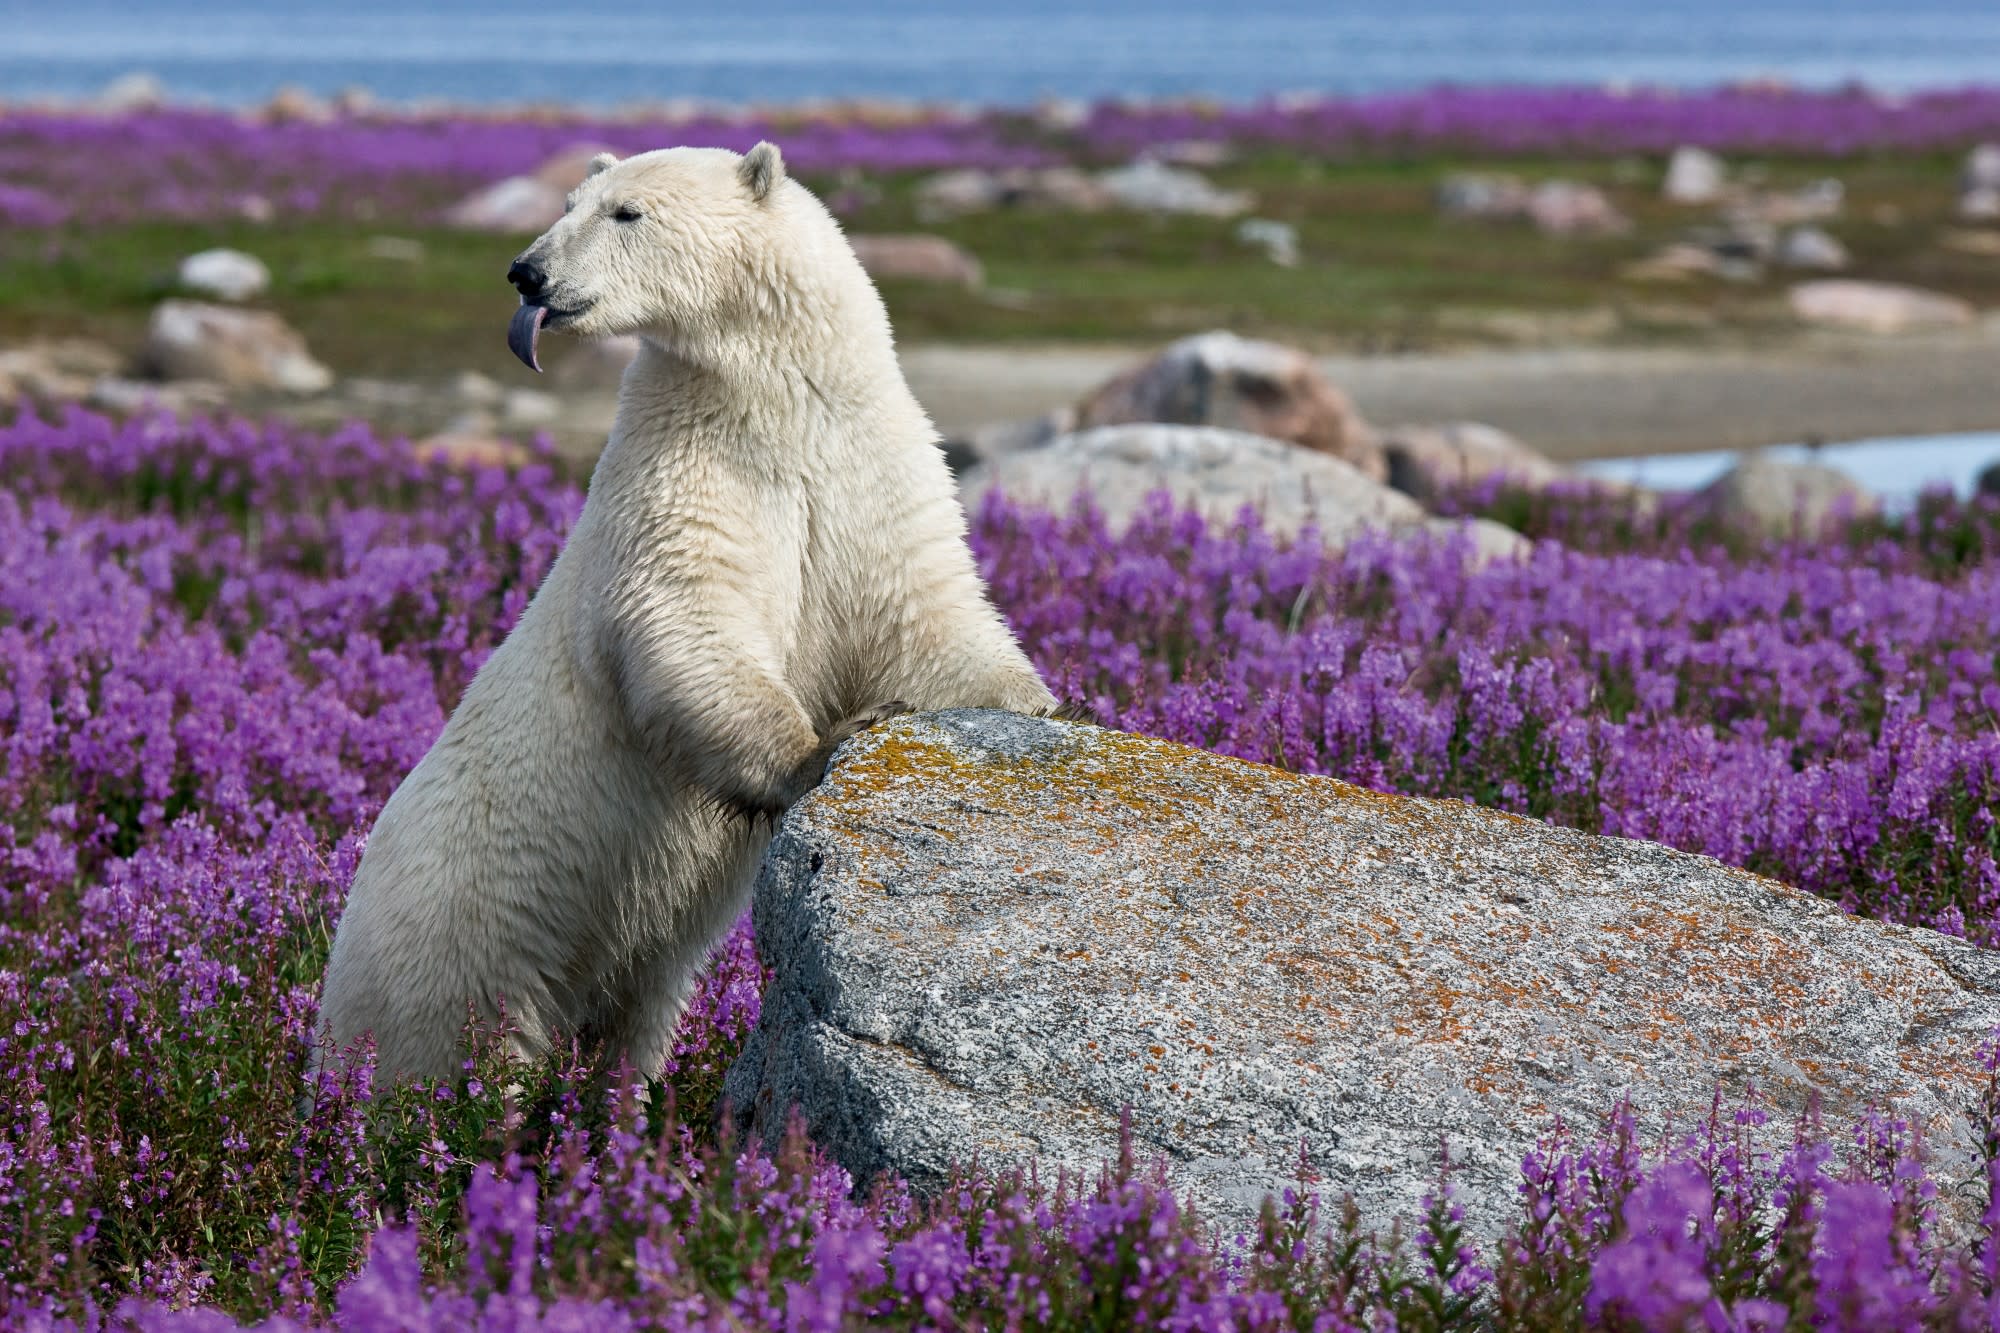  the-11-best-adventure-lodges-in-the-world-polar-bear